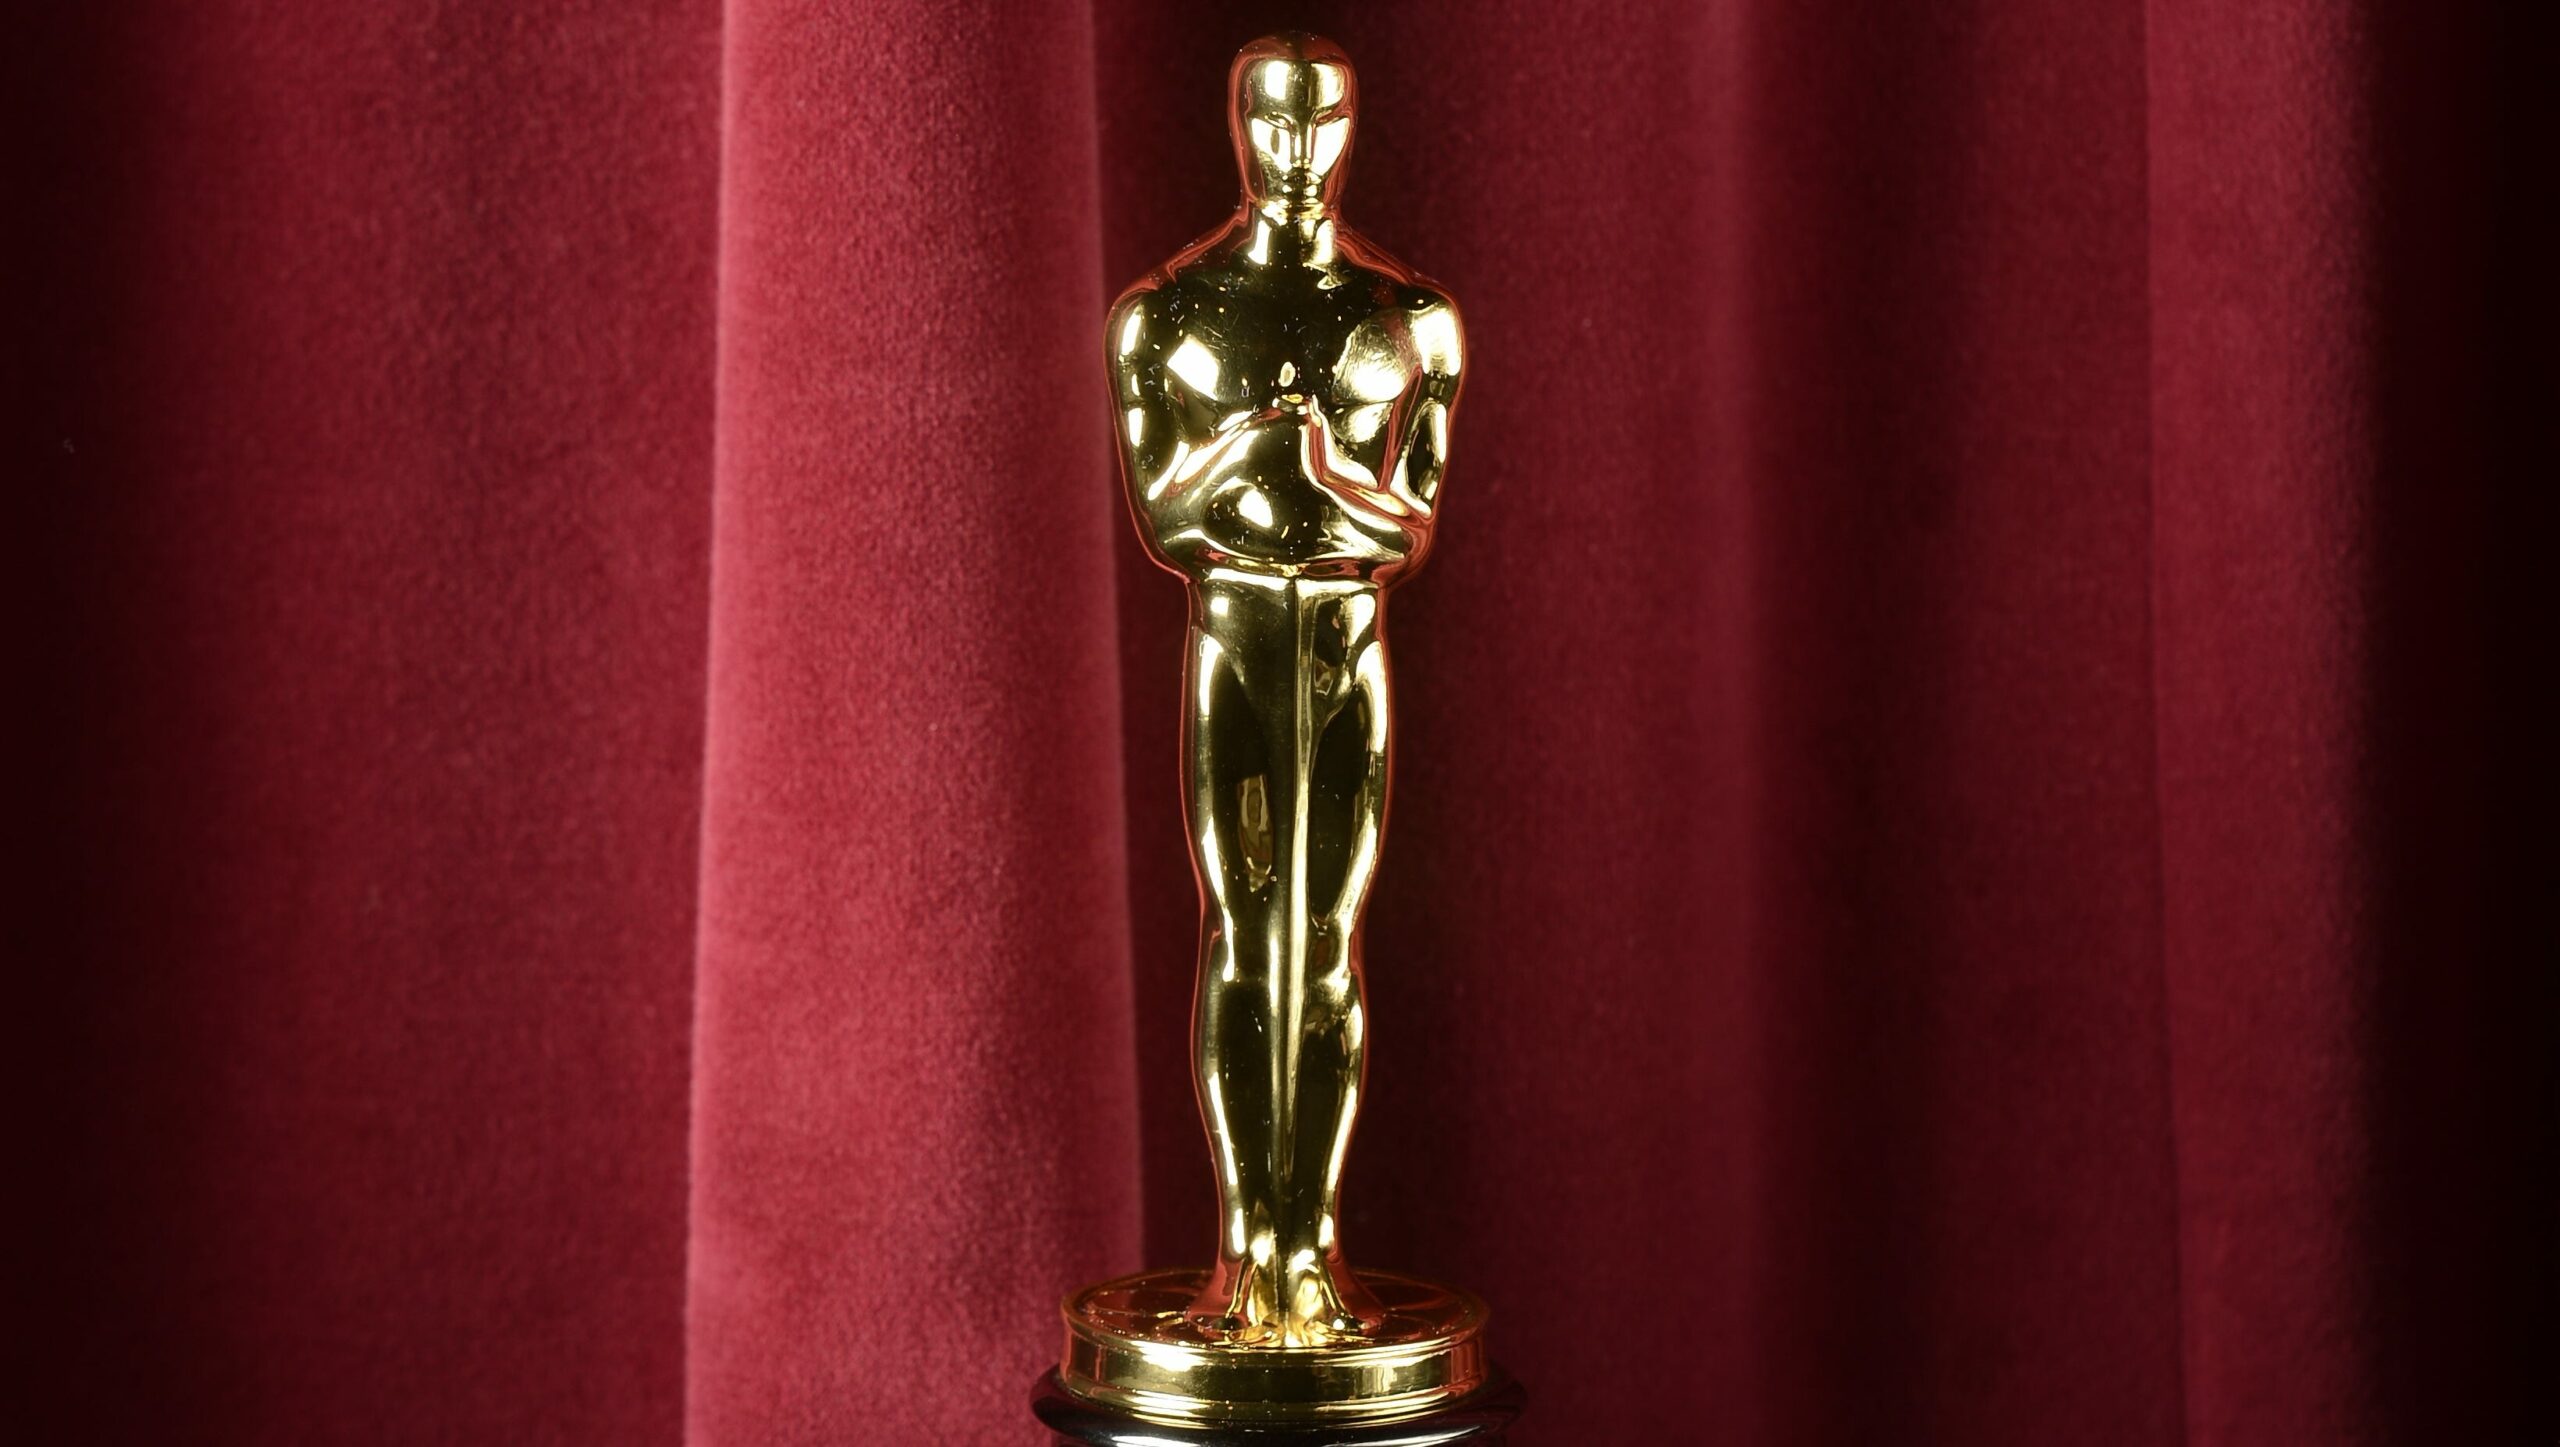 who created the academy award statuette